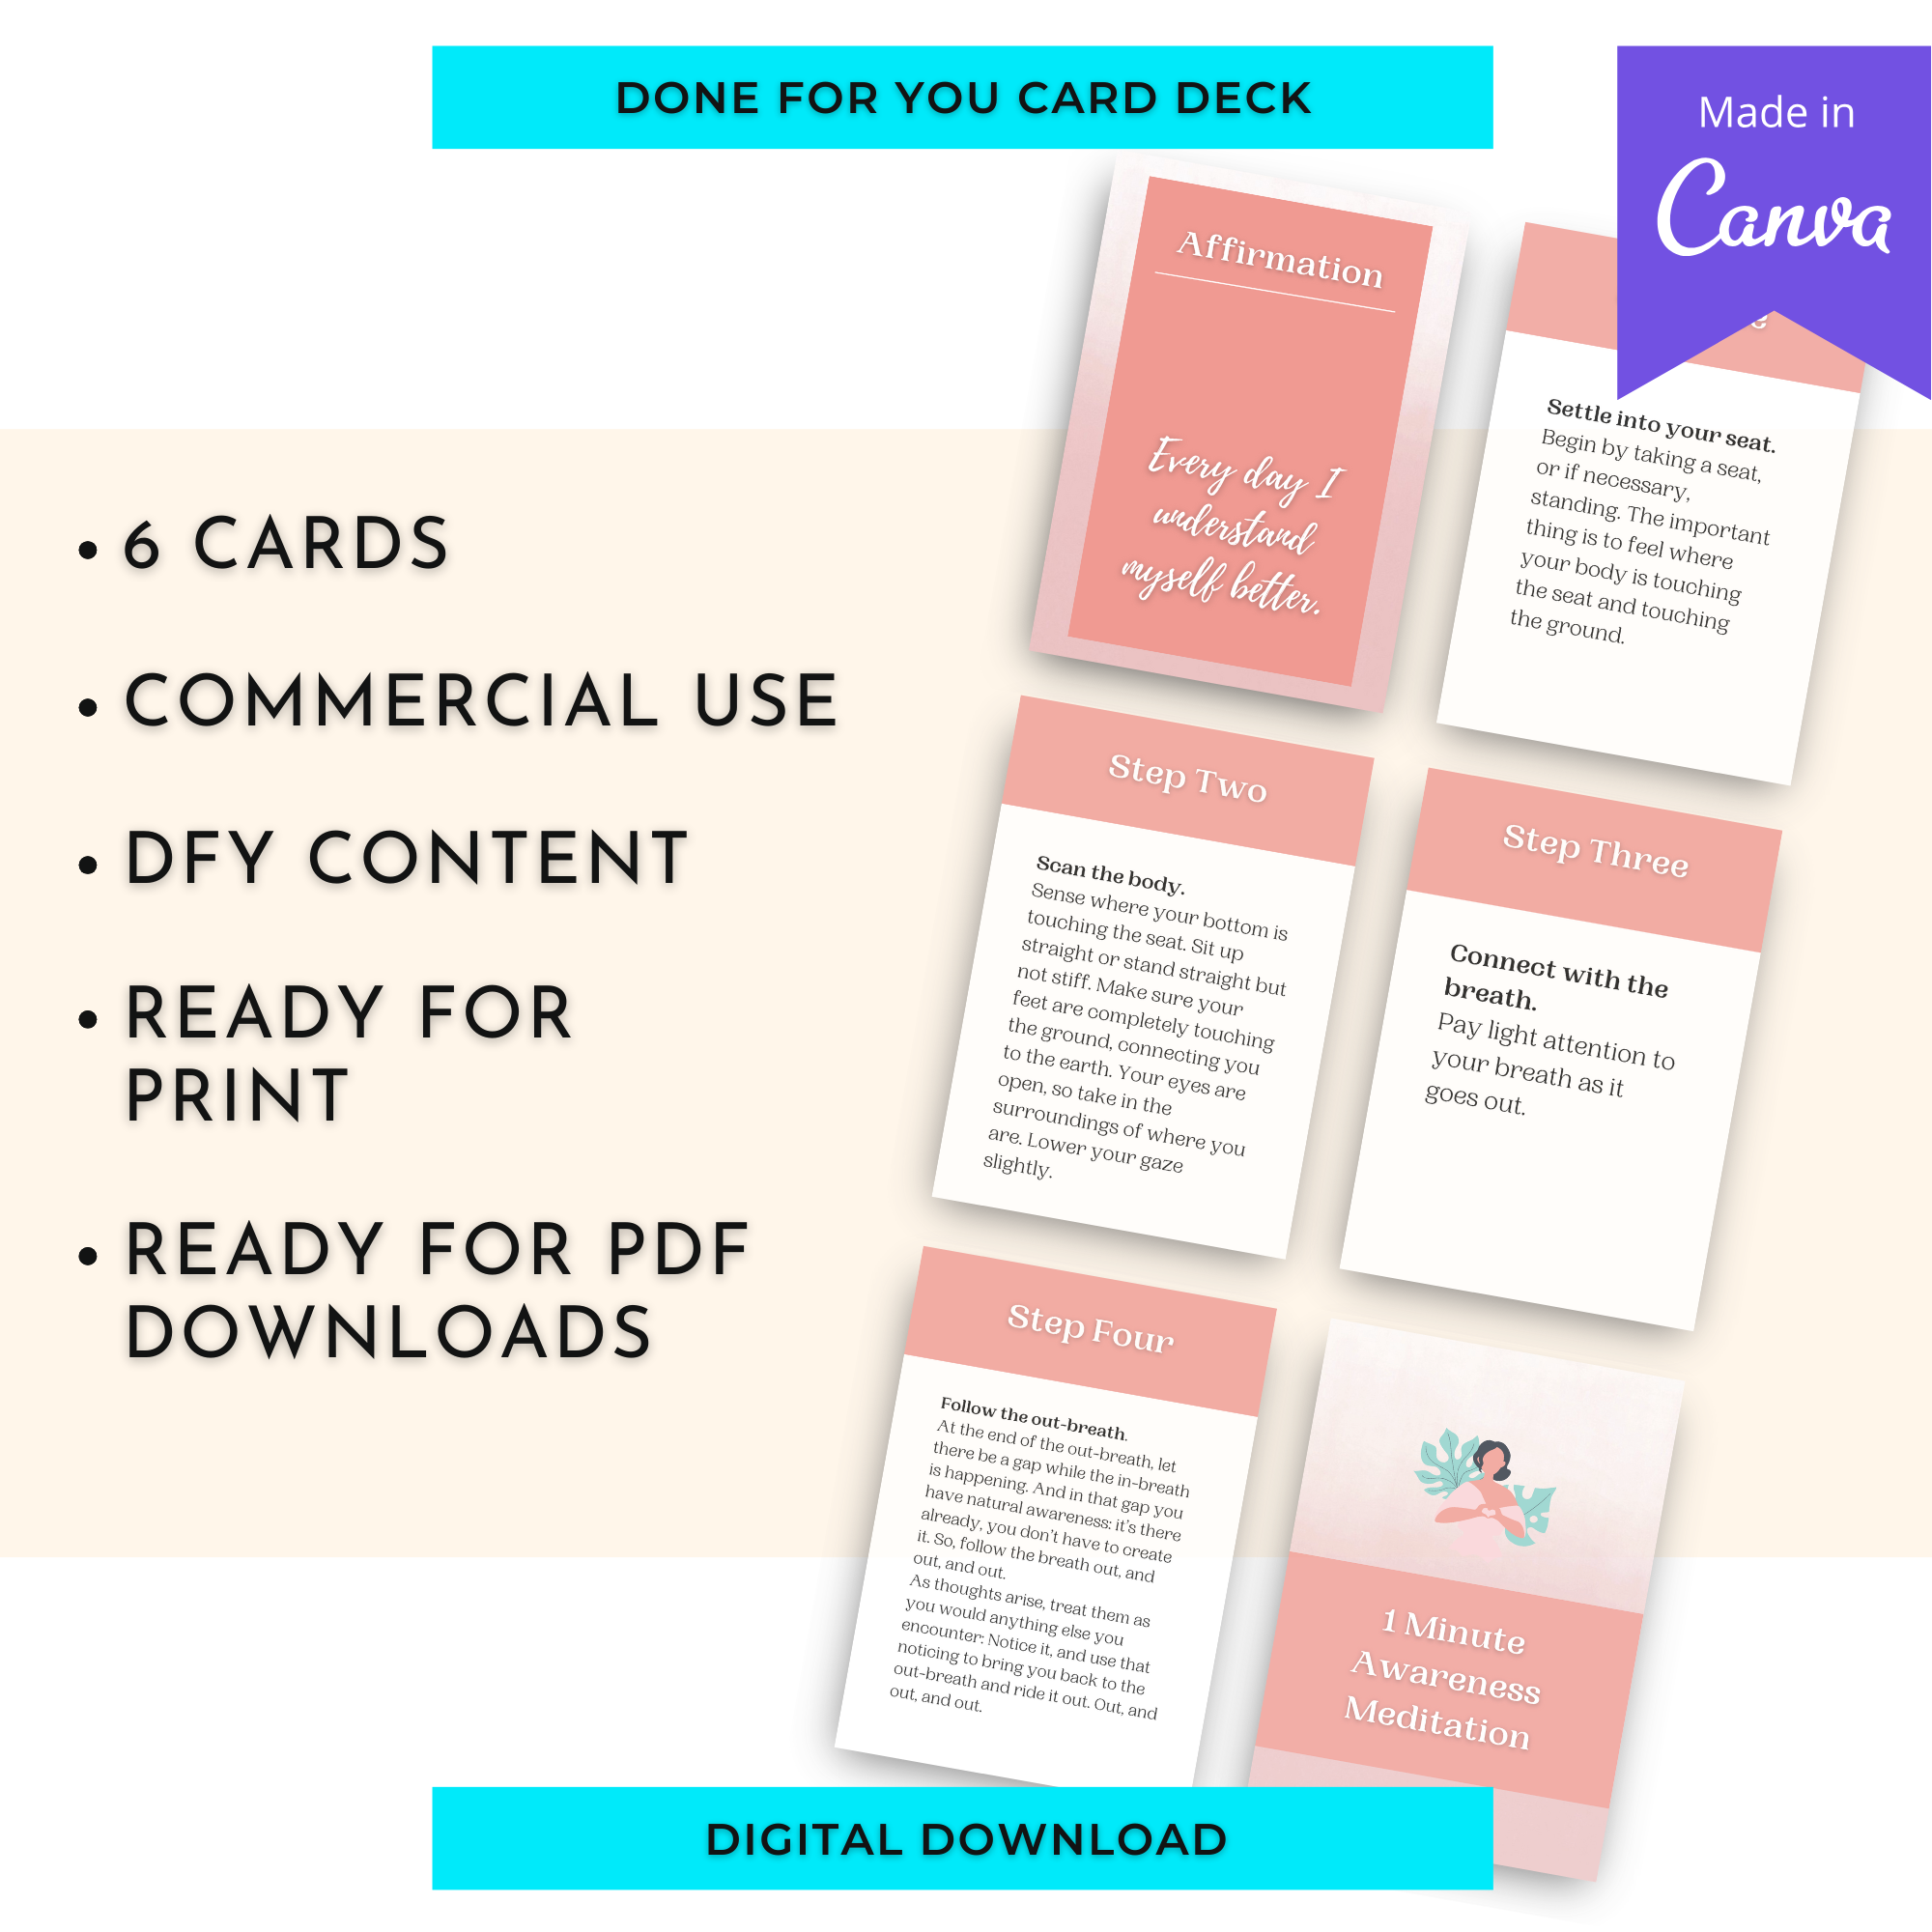 1 Minute Awareness Meditation Card Deck | Editable 6 Card Deck in Canva | Commercial Use